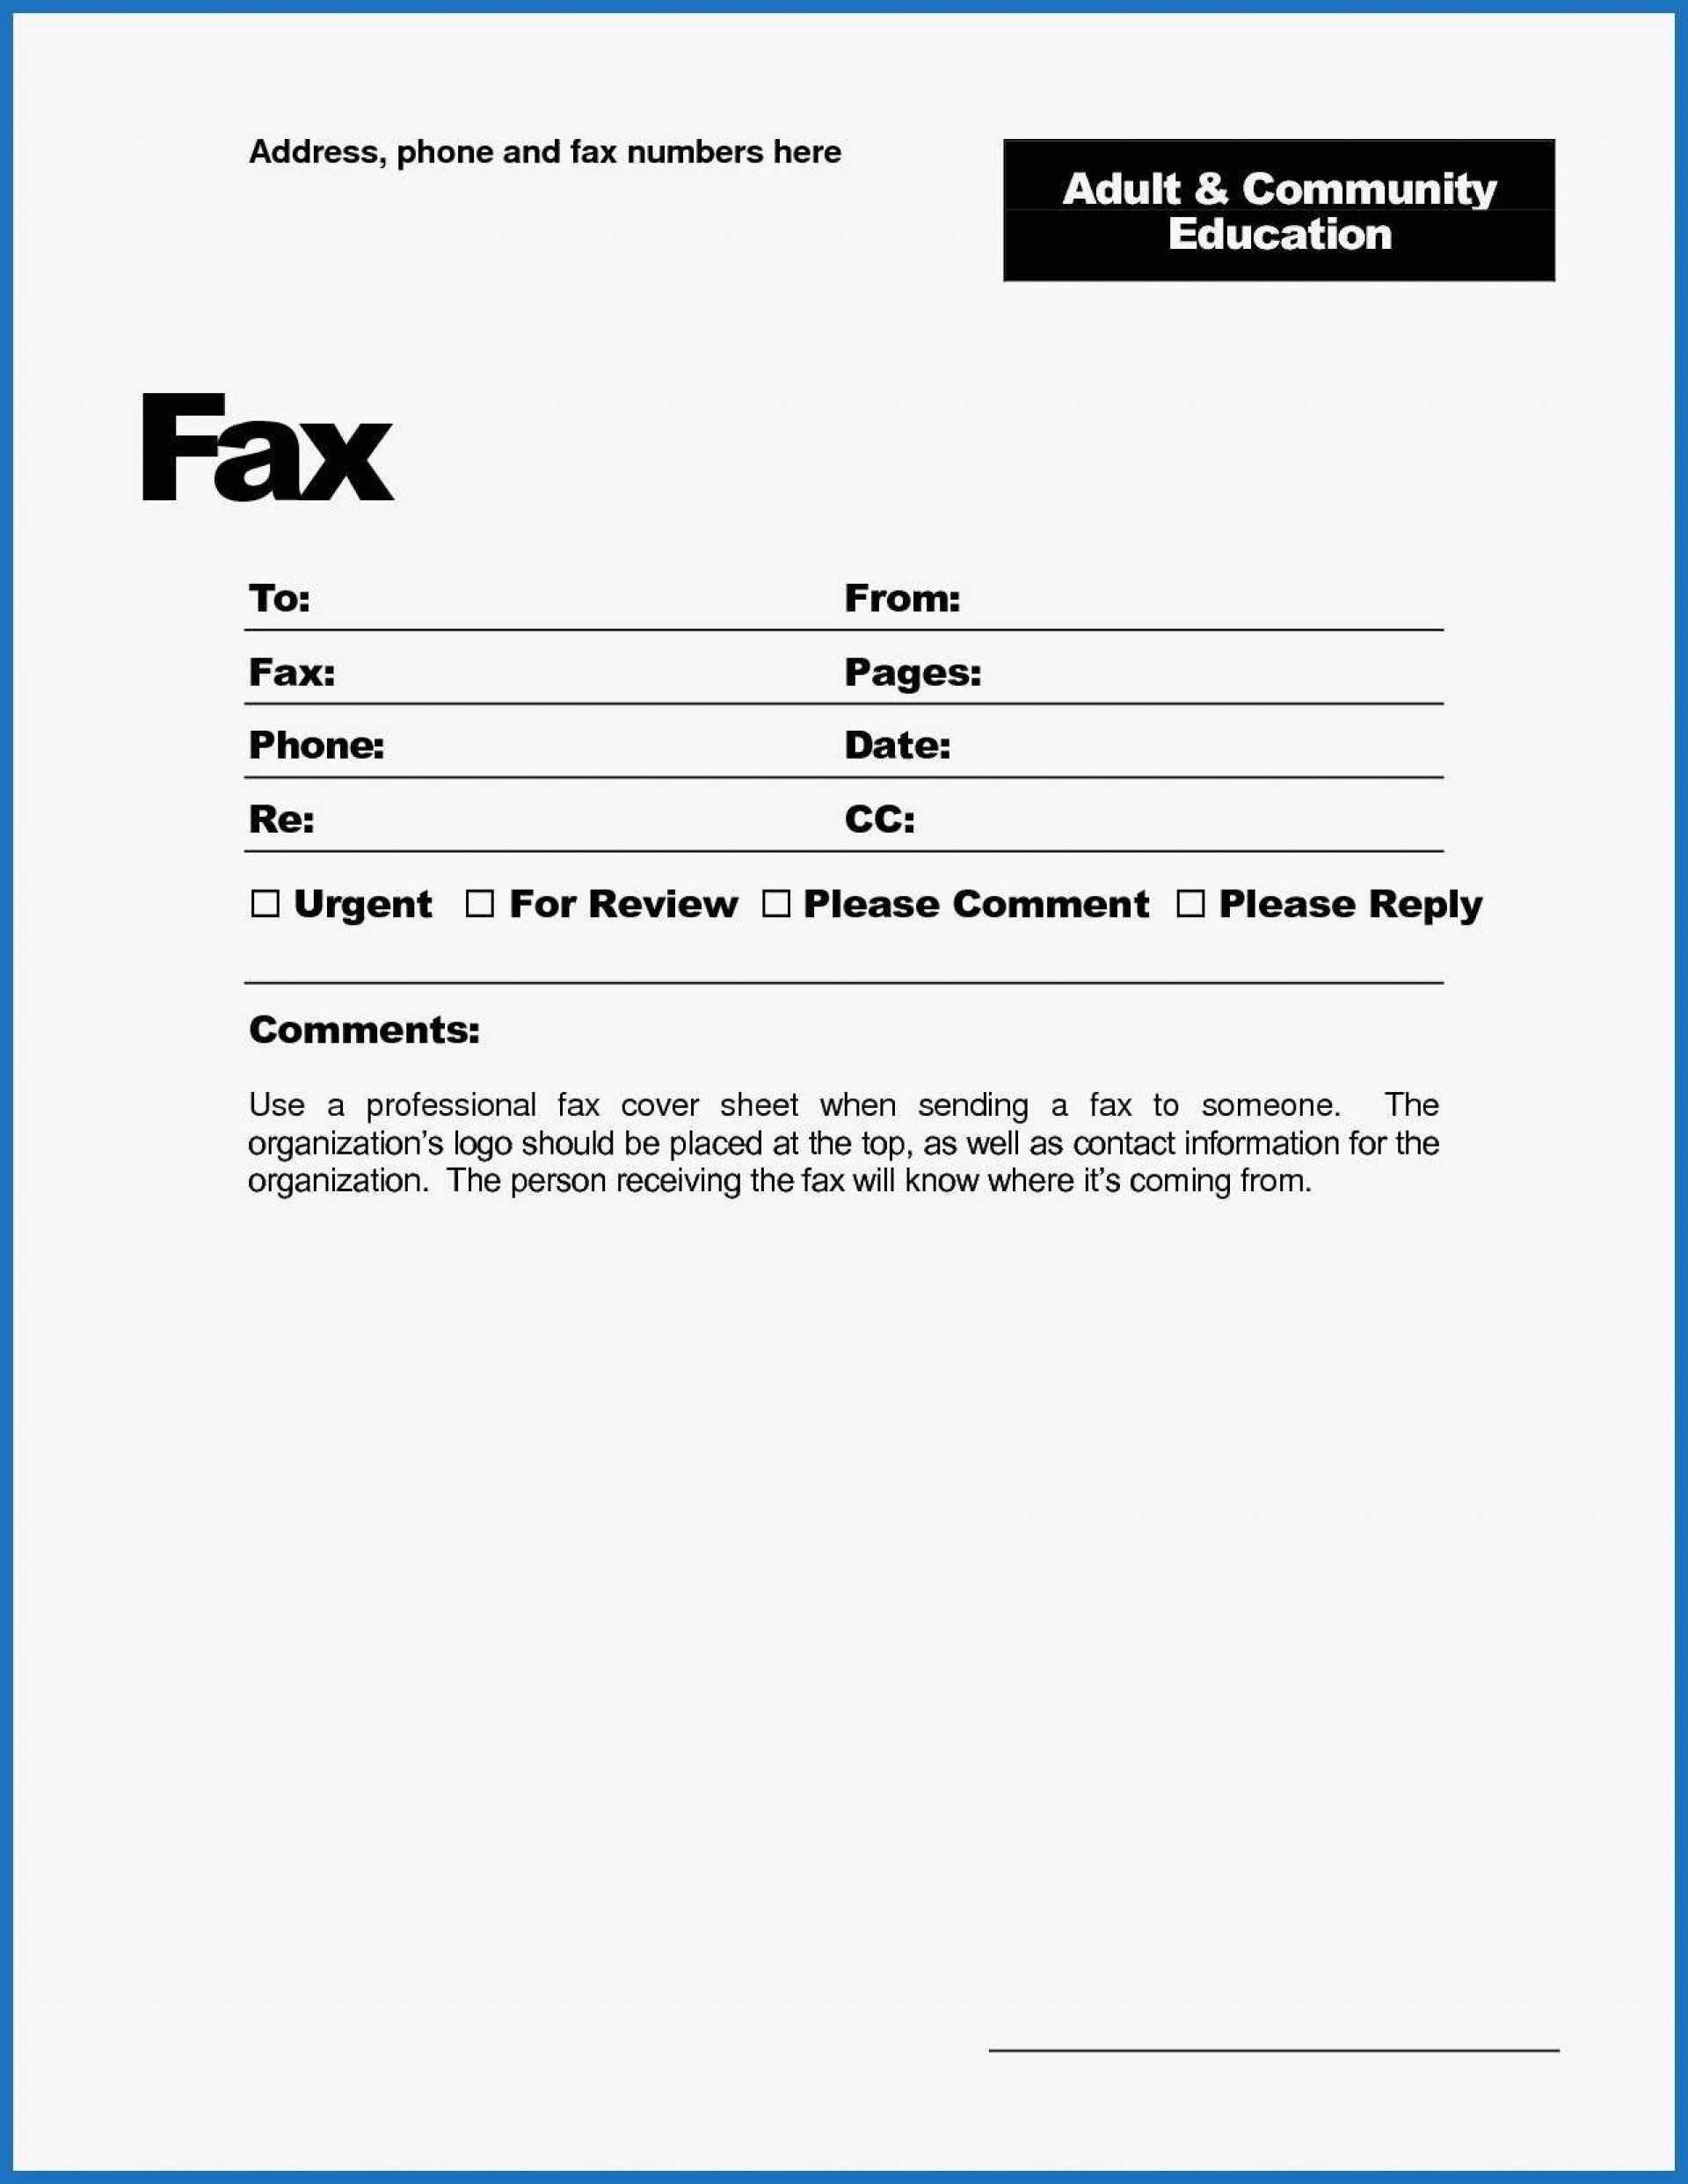 008 Fax Cover Sheet Letter Template Exceptional Ideas Free With Regard To Fax Cover Sheet Template Word 2010